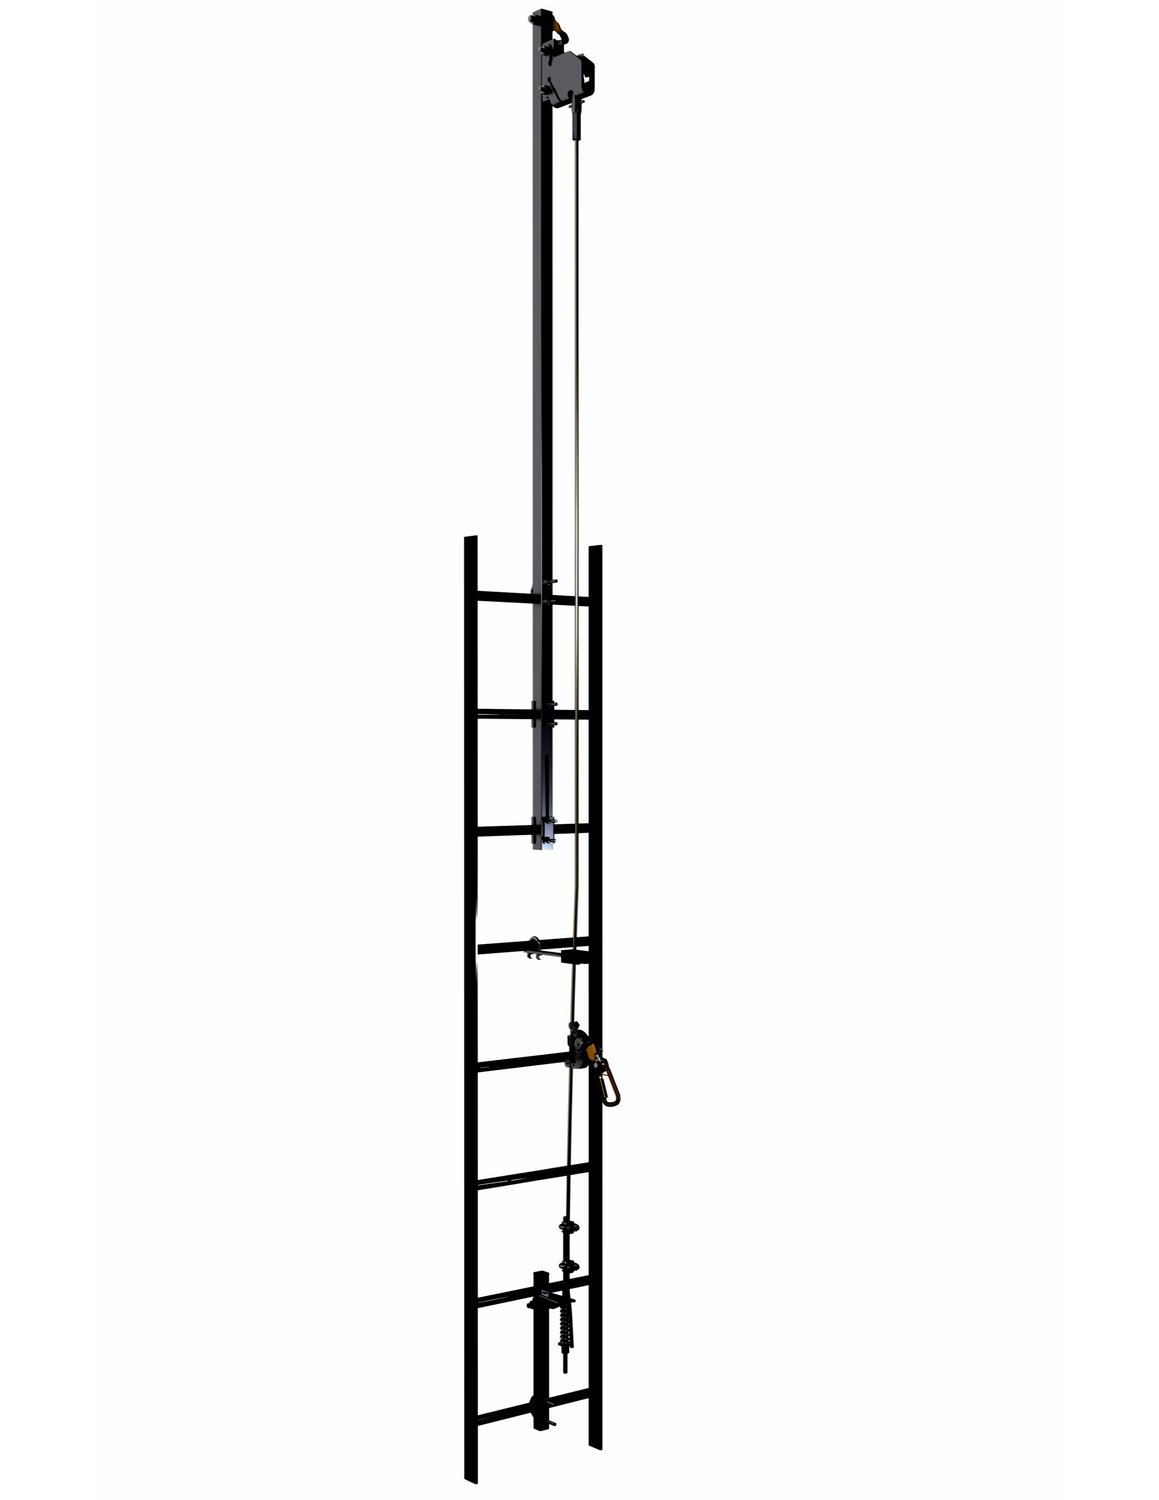 7100227918 - 3M DBI-SALA Lad-Saf Cable Vertical Safety System Bracketry, Climb
Extension 6116636, 2 User, Galvanized Steel